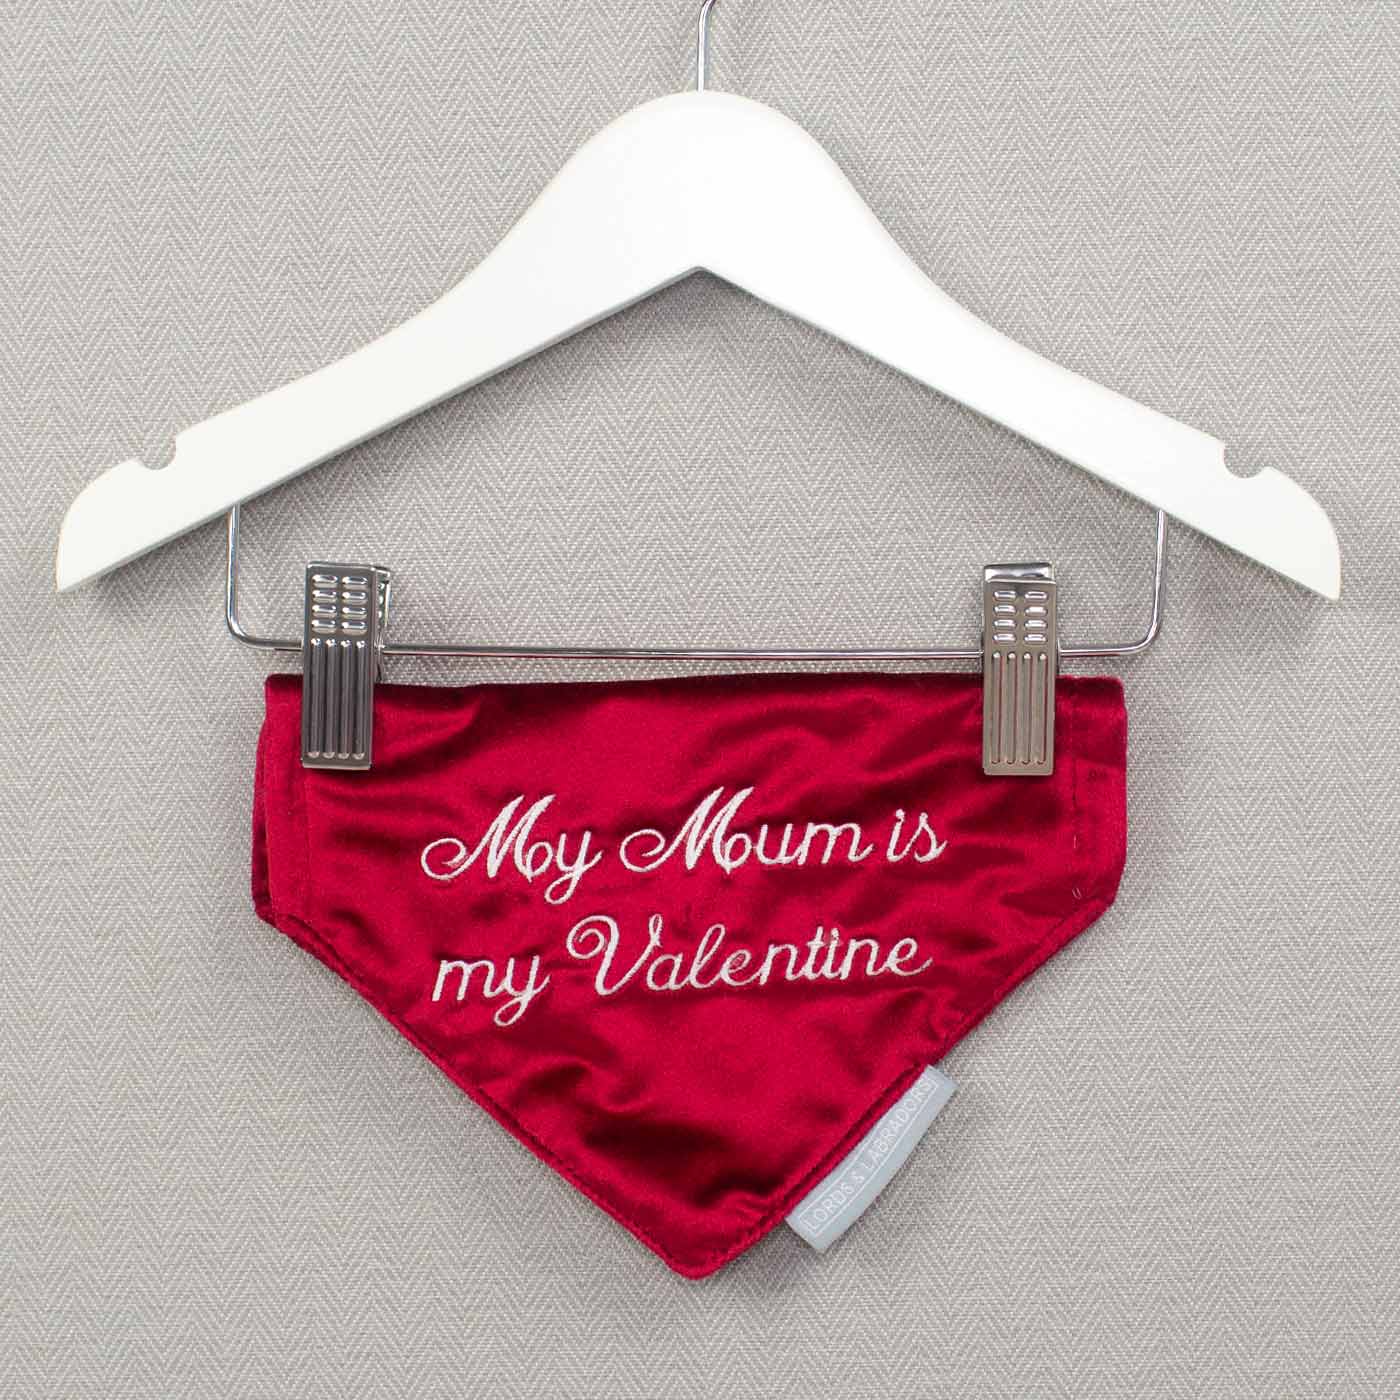 Discover The Perfect Bandana For Dogs, 'My Mum Is My Valentine' Valentine Dog Bandana In Luxury Cranberry Velvet, Available Now at Lords & Labradors